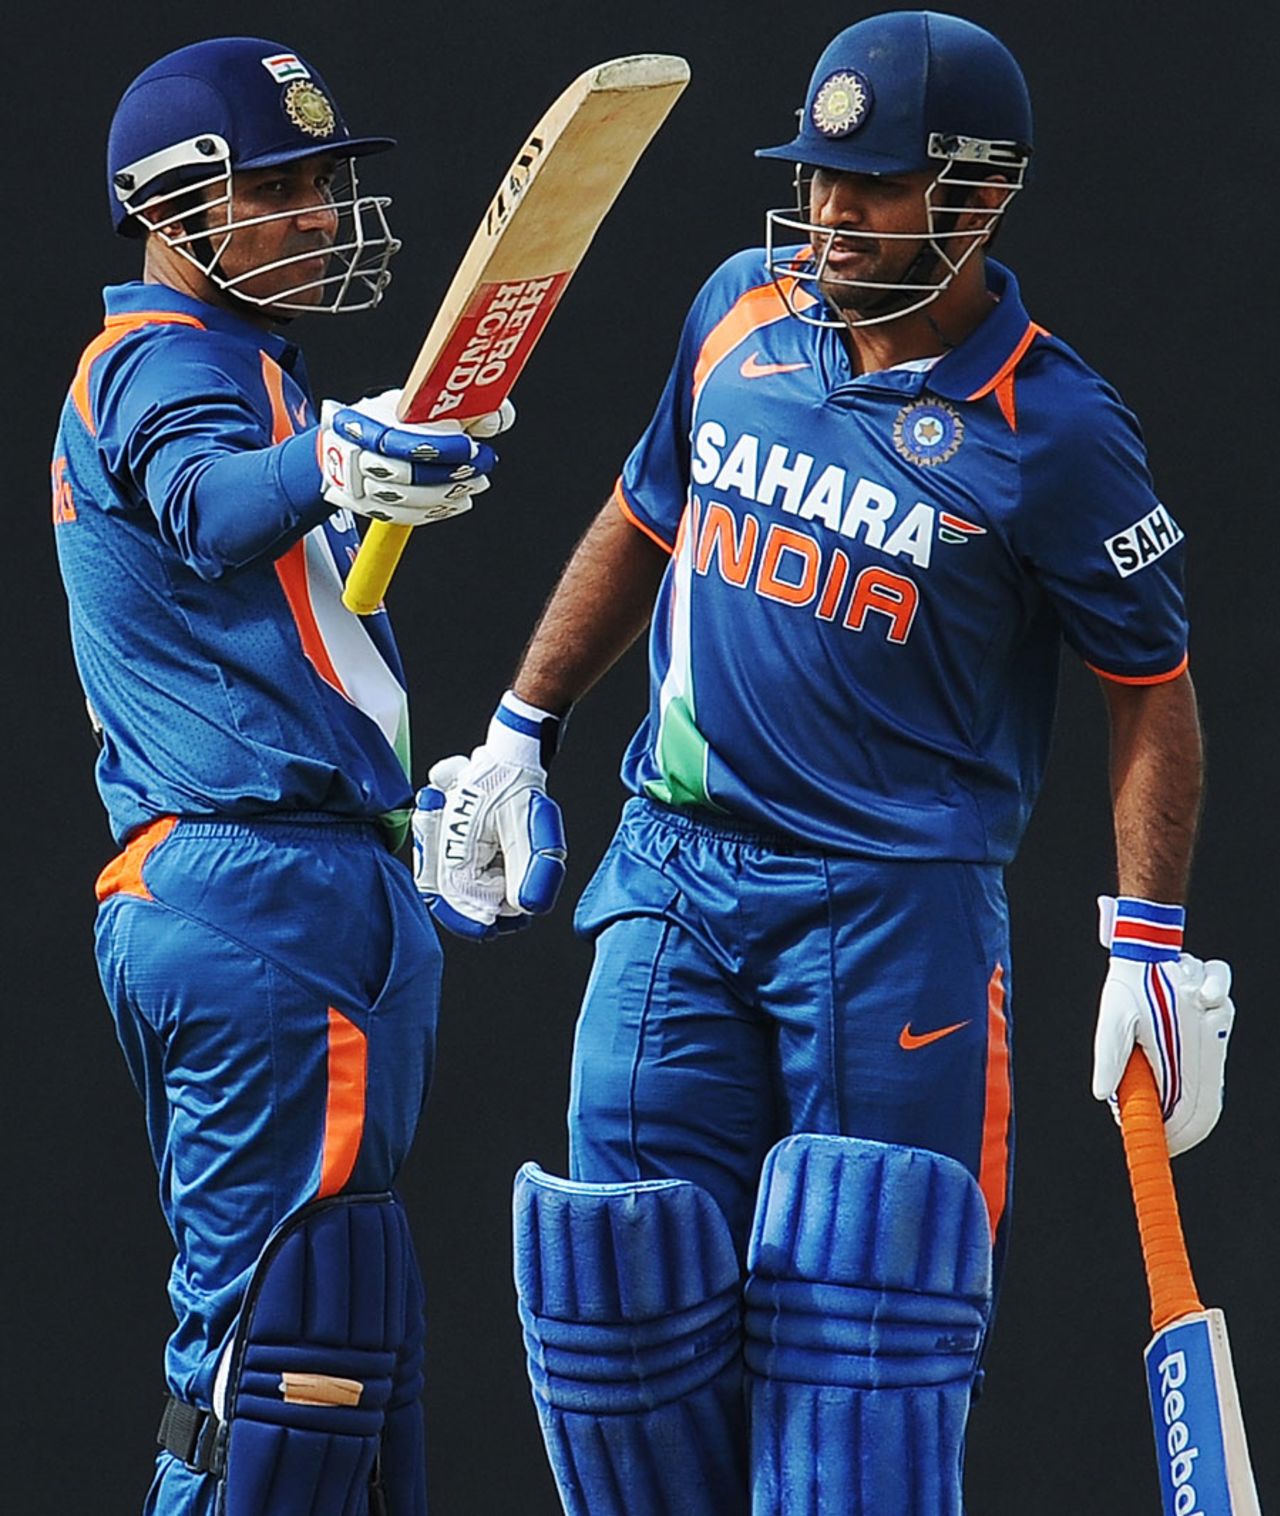 Virender Sehwag brings up his fifty in MS Dhoni's company, India v New Zealand, tri-series, 6th ODI, Dambulla, August 25, 2010